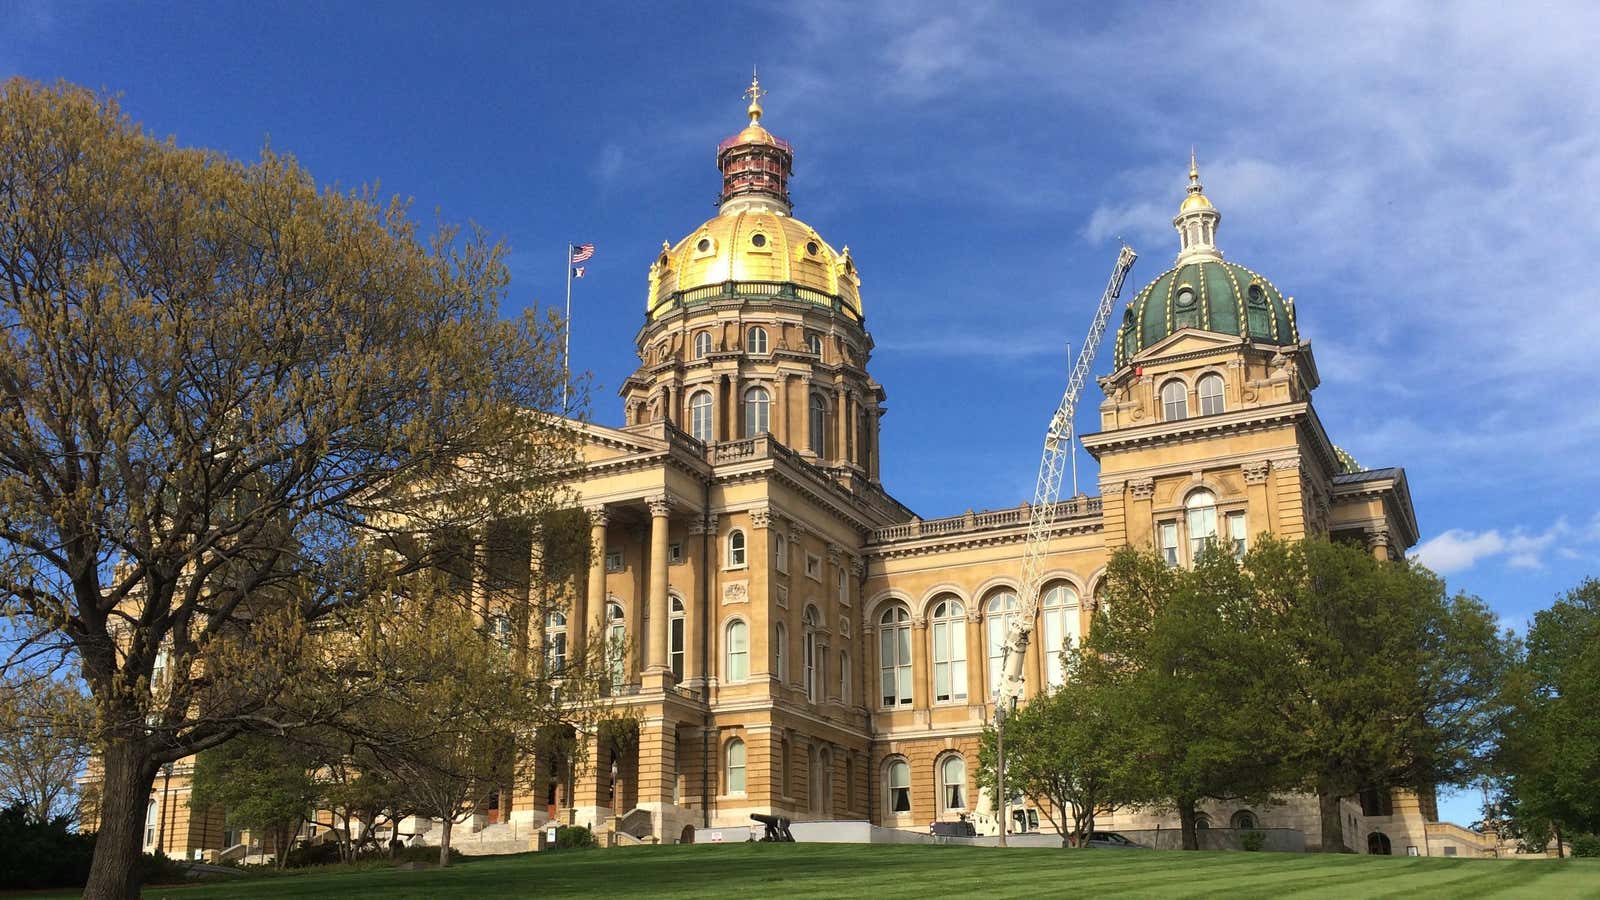 The Iowa capitol building, which Cody Ray Leveke allegedly threatened to target.